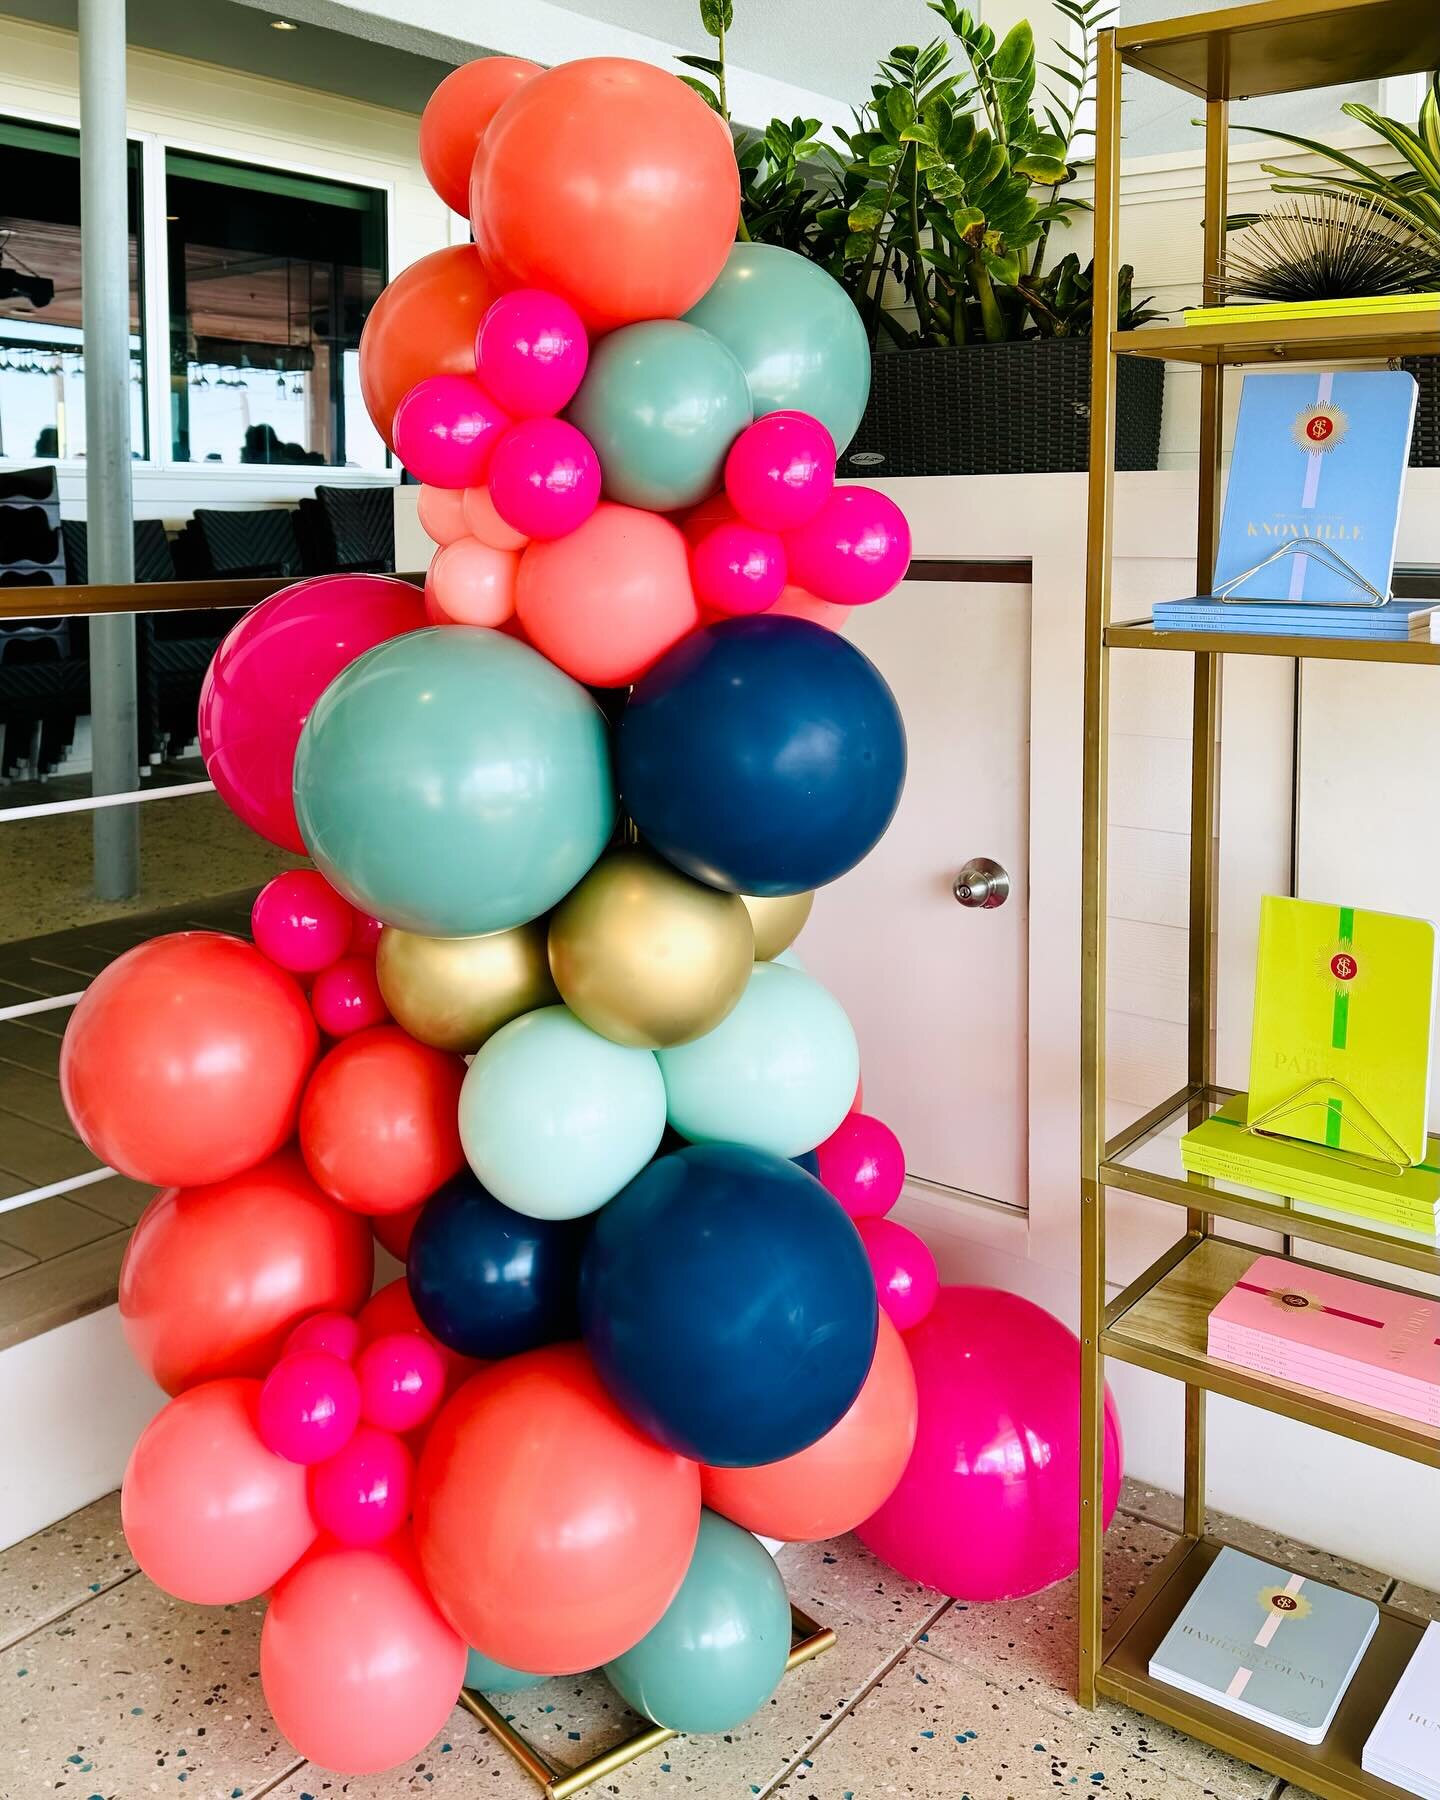 Color is kinda my thing, so matching these magazine covers was so FUN! 🤩 We absolutely loved creating these organic balloon towers and balloon chandeliers for @tsgsarasota Launch Party | Volume 9! 
.
.
.
.
#popofcolor #organicballoondecor #balloonch